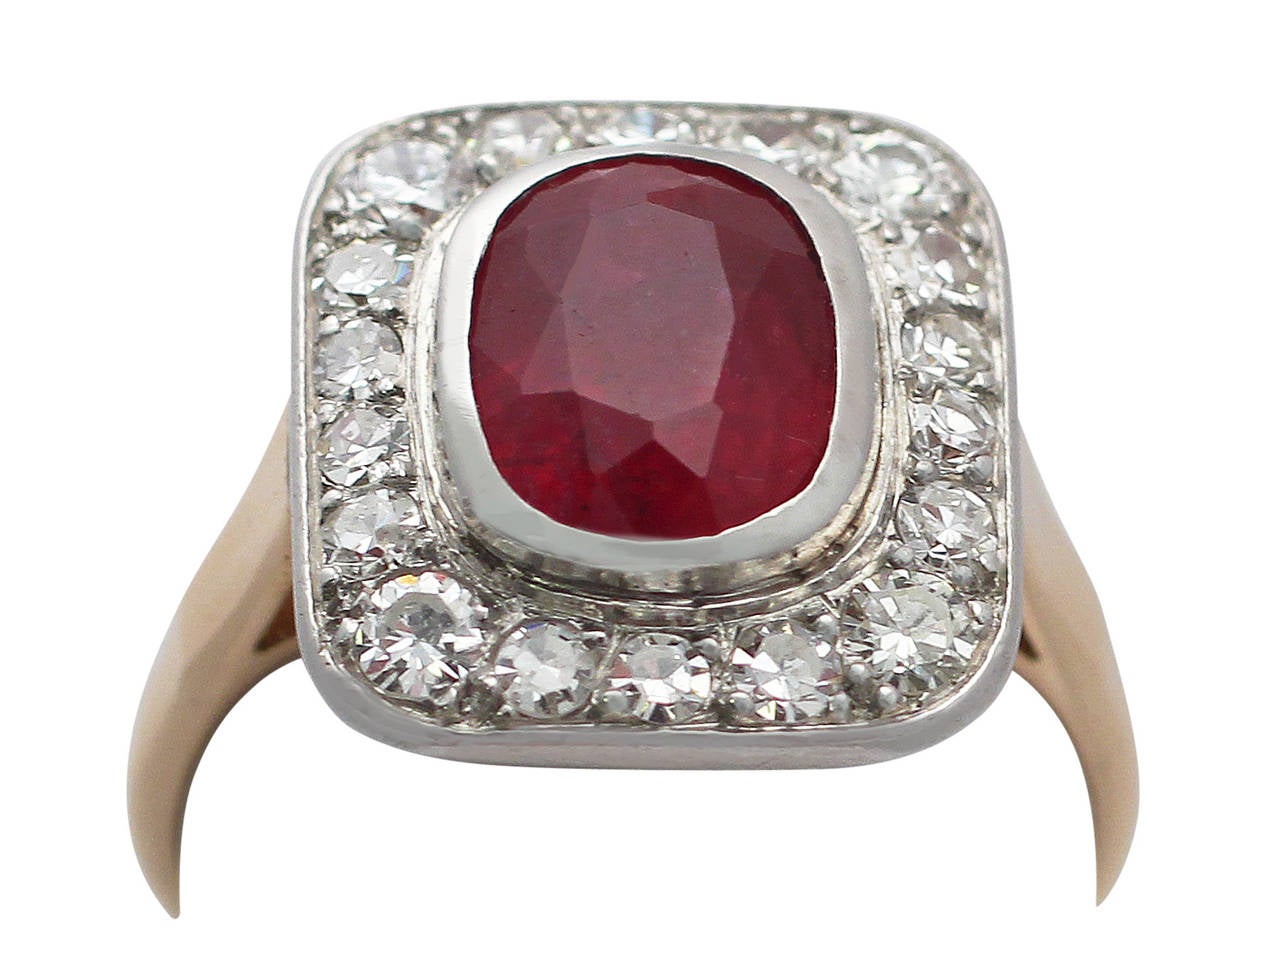 A fine and impressive antique French 2.85 carat natural ruby and 0.75 carat diamond, 18 karat rose gold, platinum set dress ring; part of our antique jewelry and estate jewelry collections

This impressive antique French dress ring has been